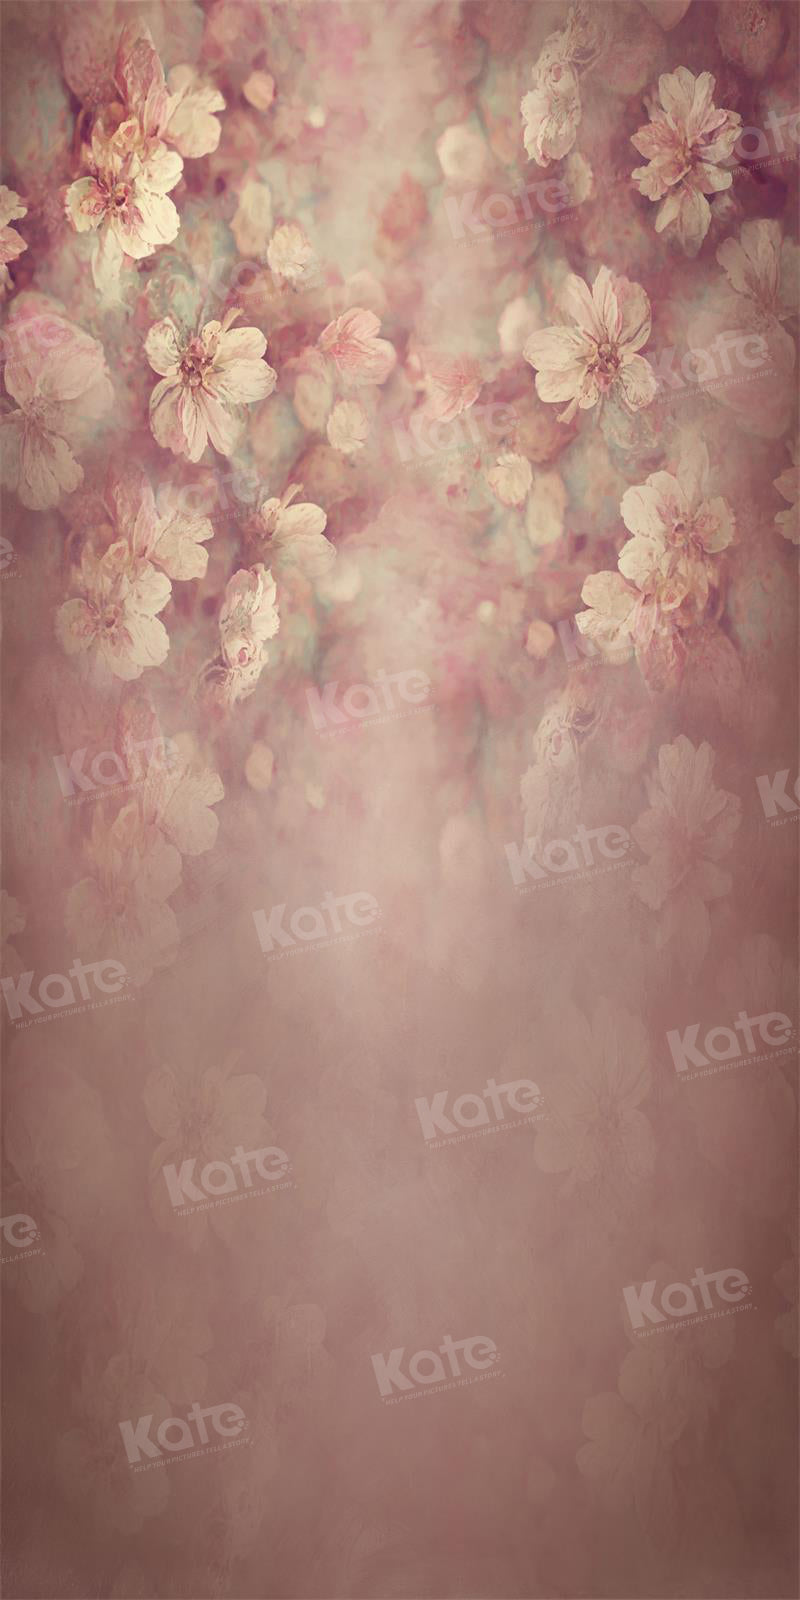 Kate Sweep Fine Art Floral Backdrop for Photography